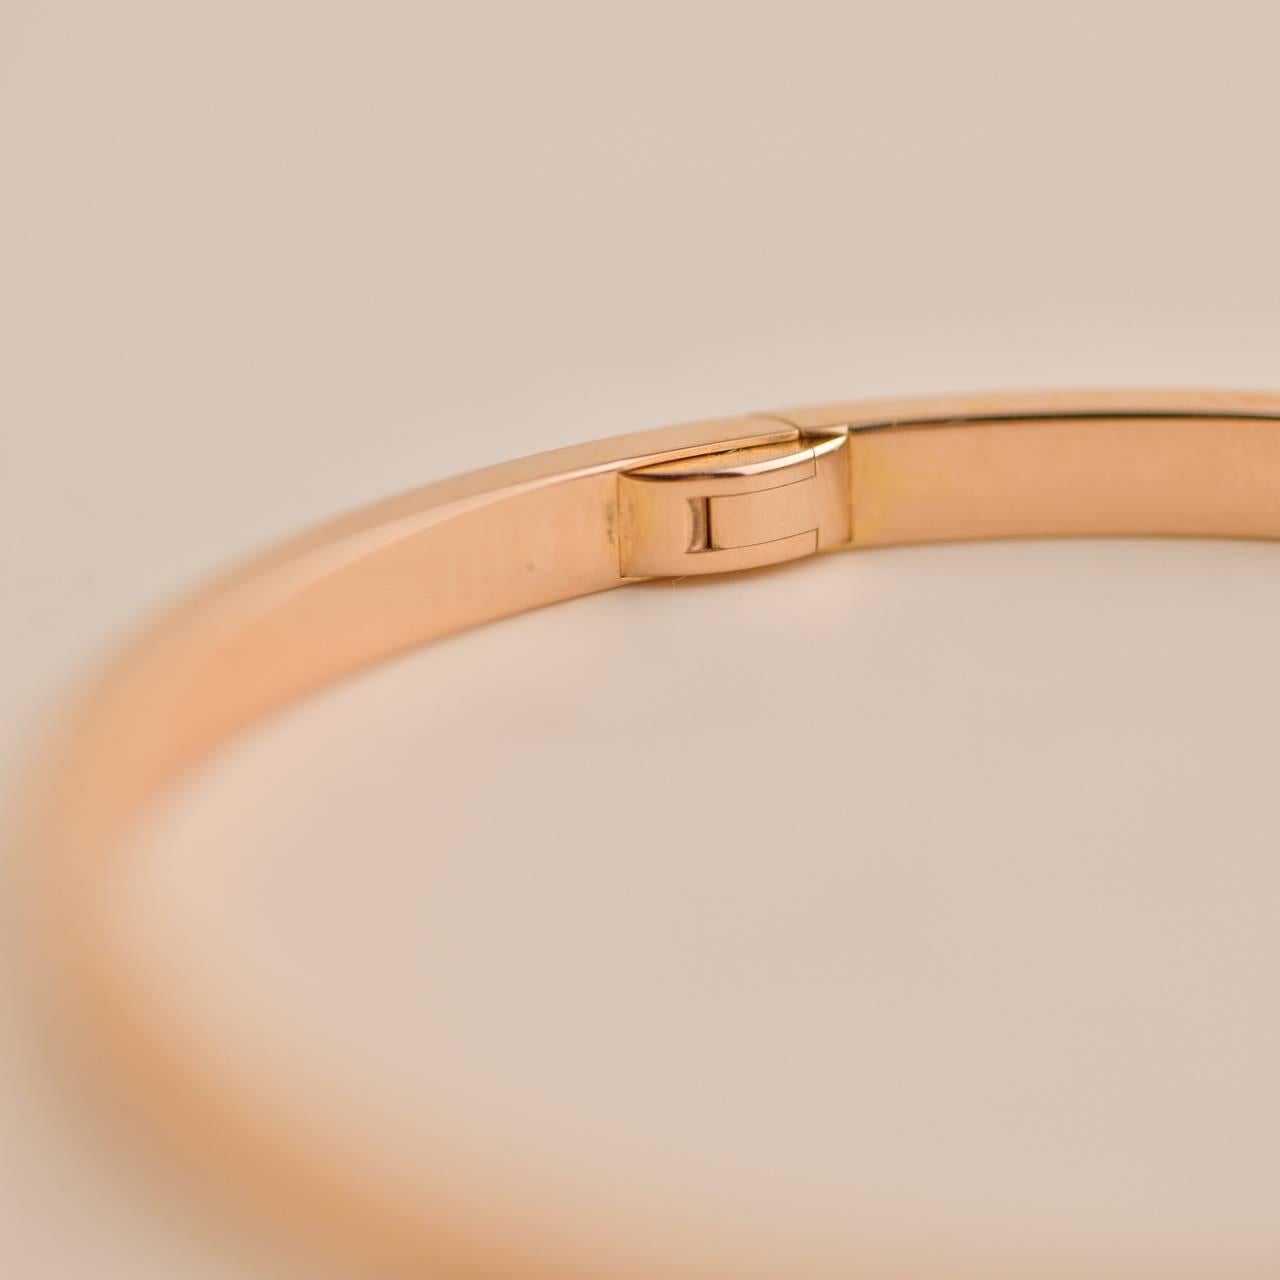 Cartier Love Bracelet Small Model 18k Rose Gold Size 17 In Excellent Condition For Sale In Banbury, GB